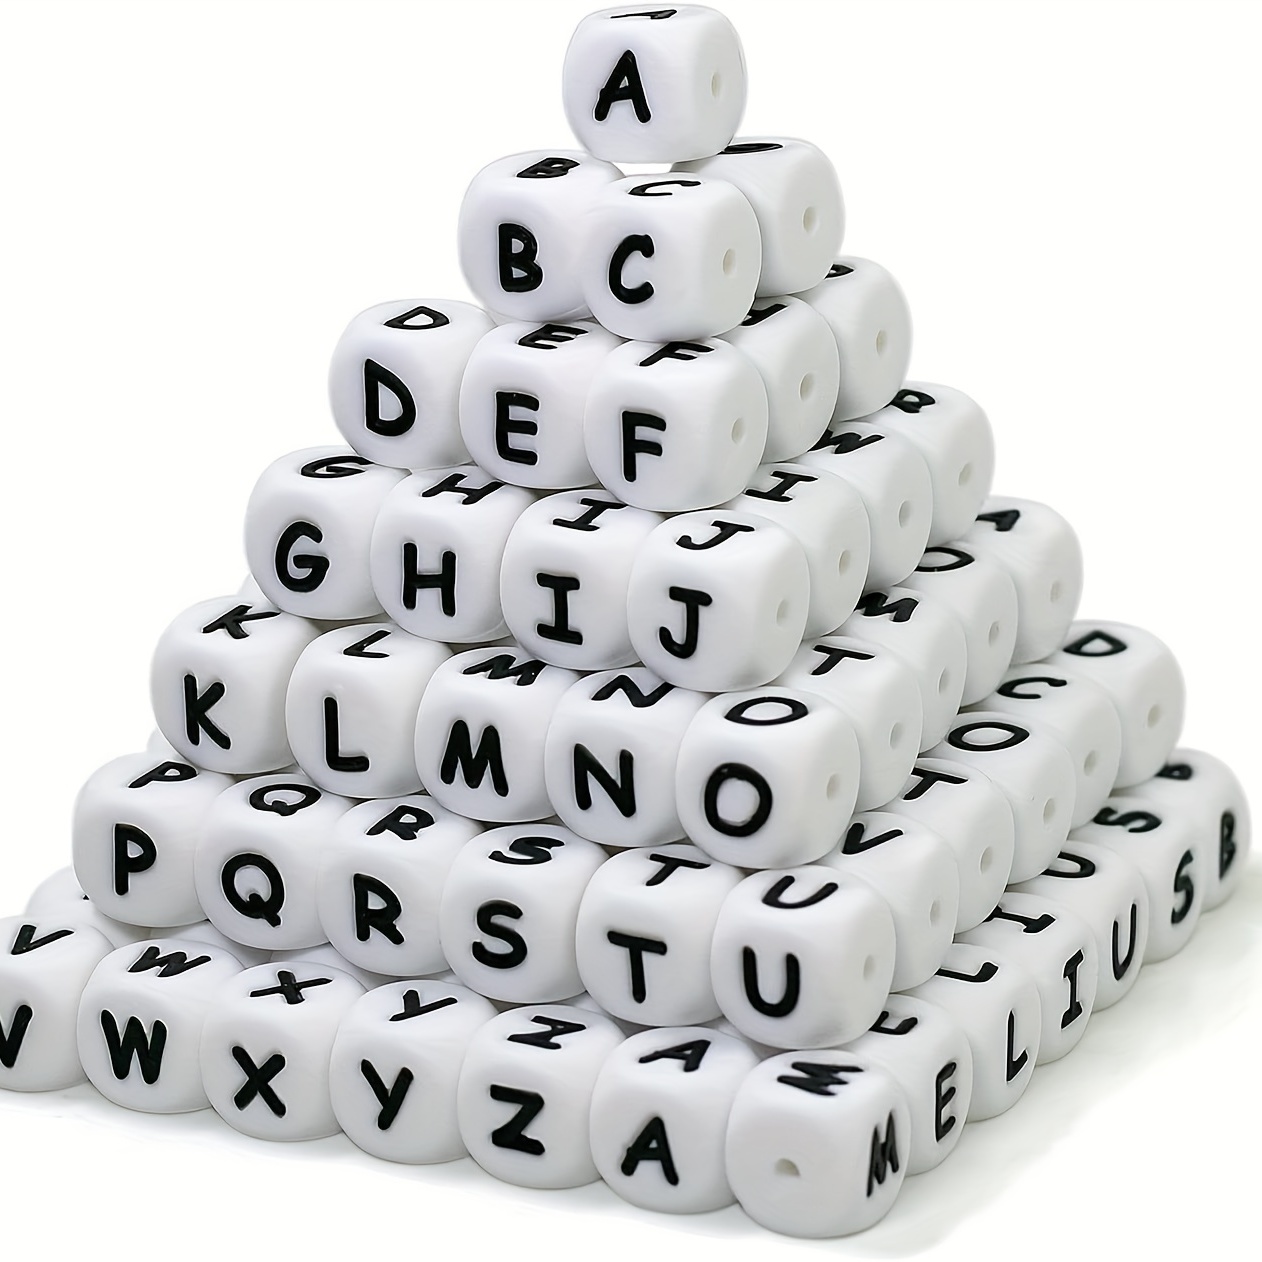 Wholesale 20Pcs White Cube Letter Silicone Beads 12x12x12mm Square